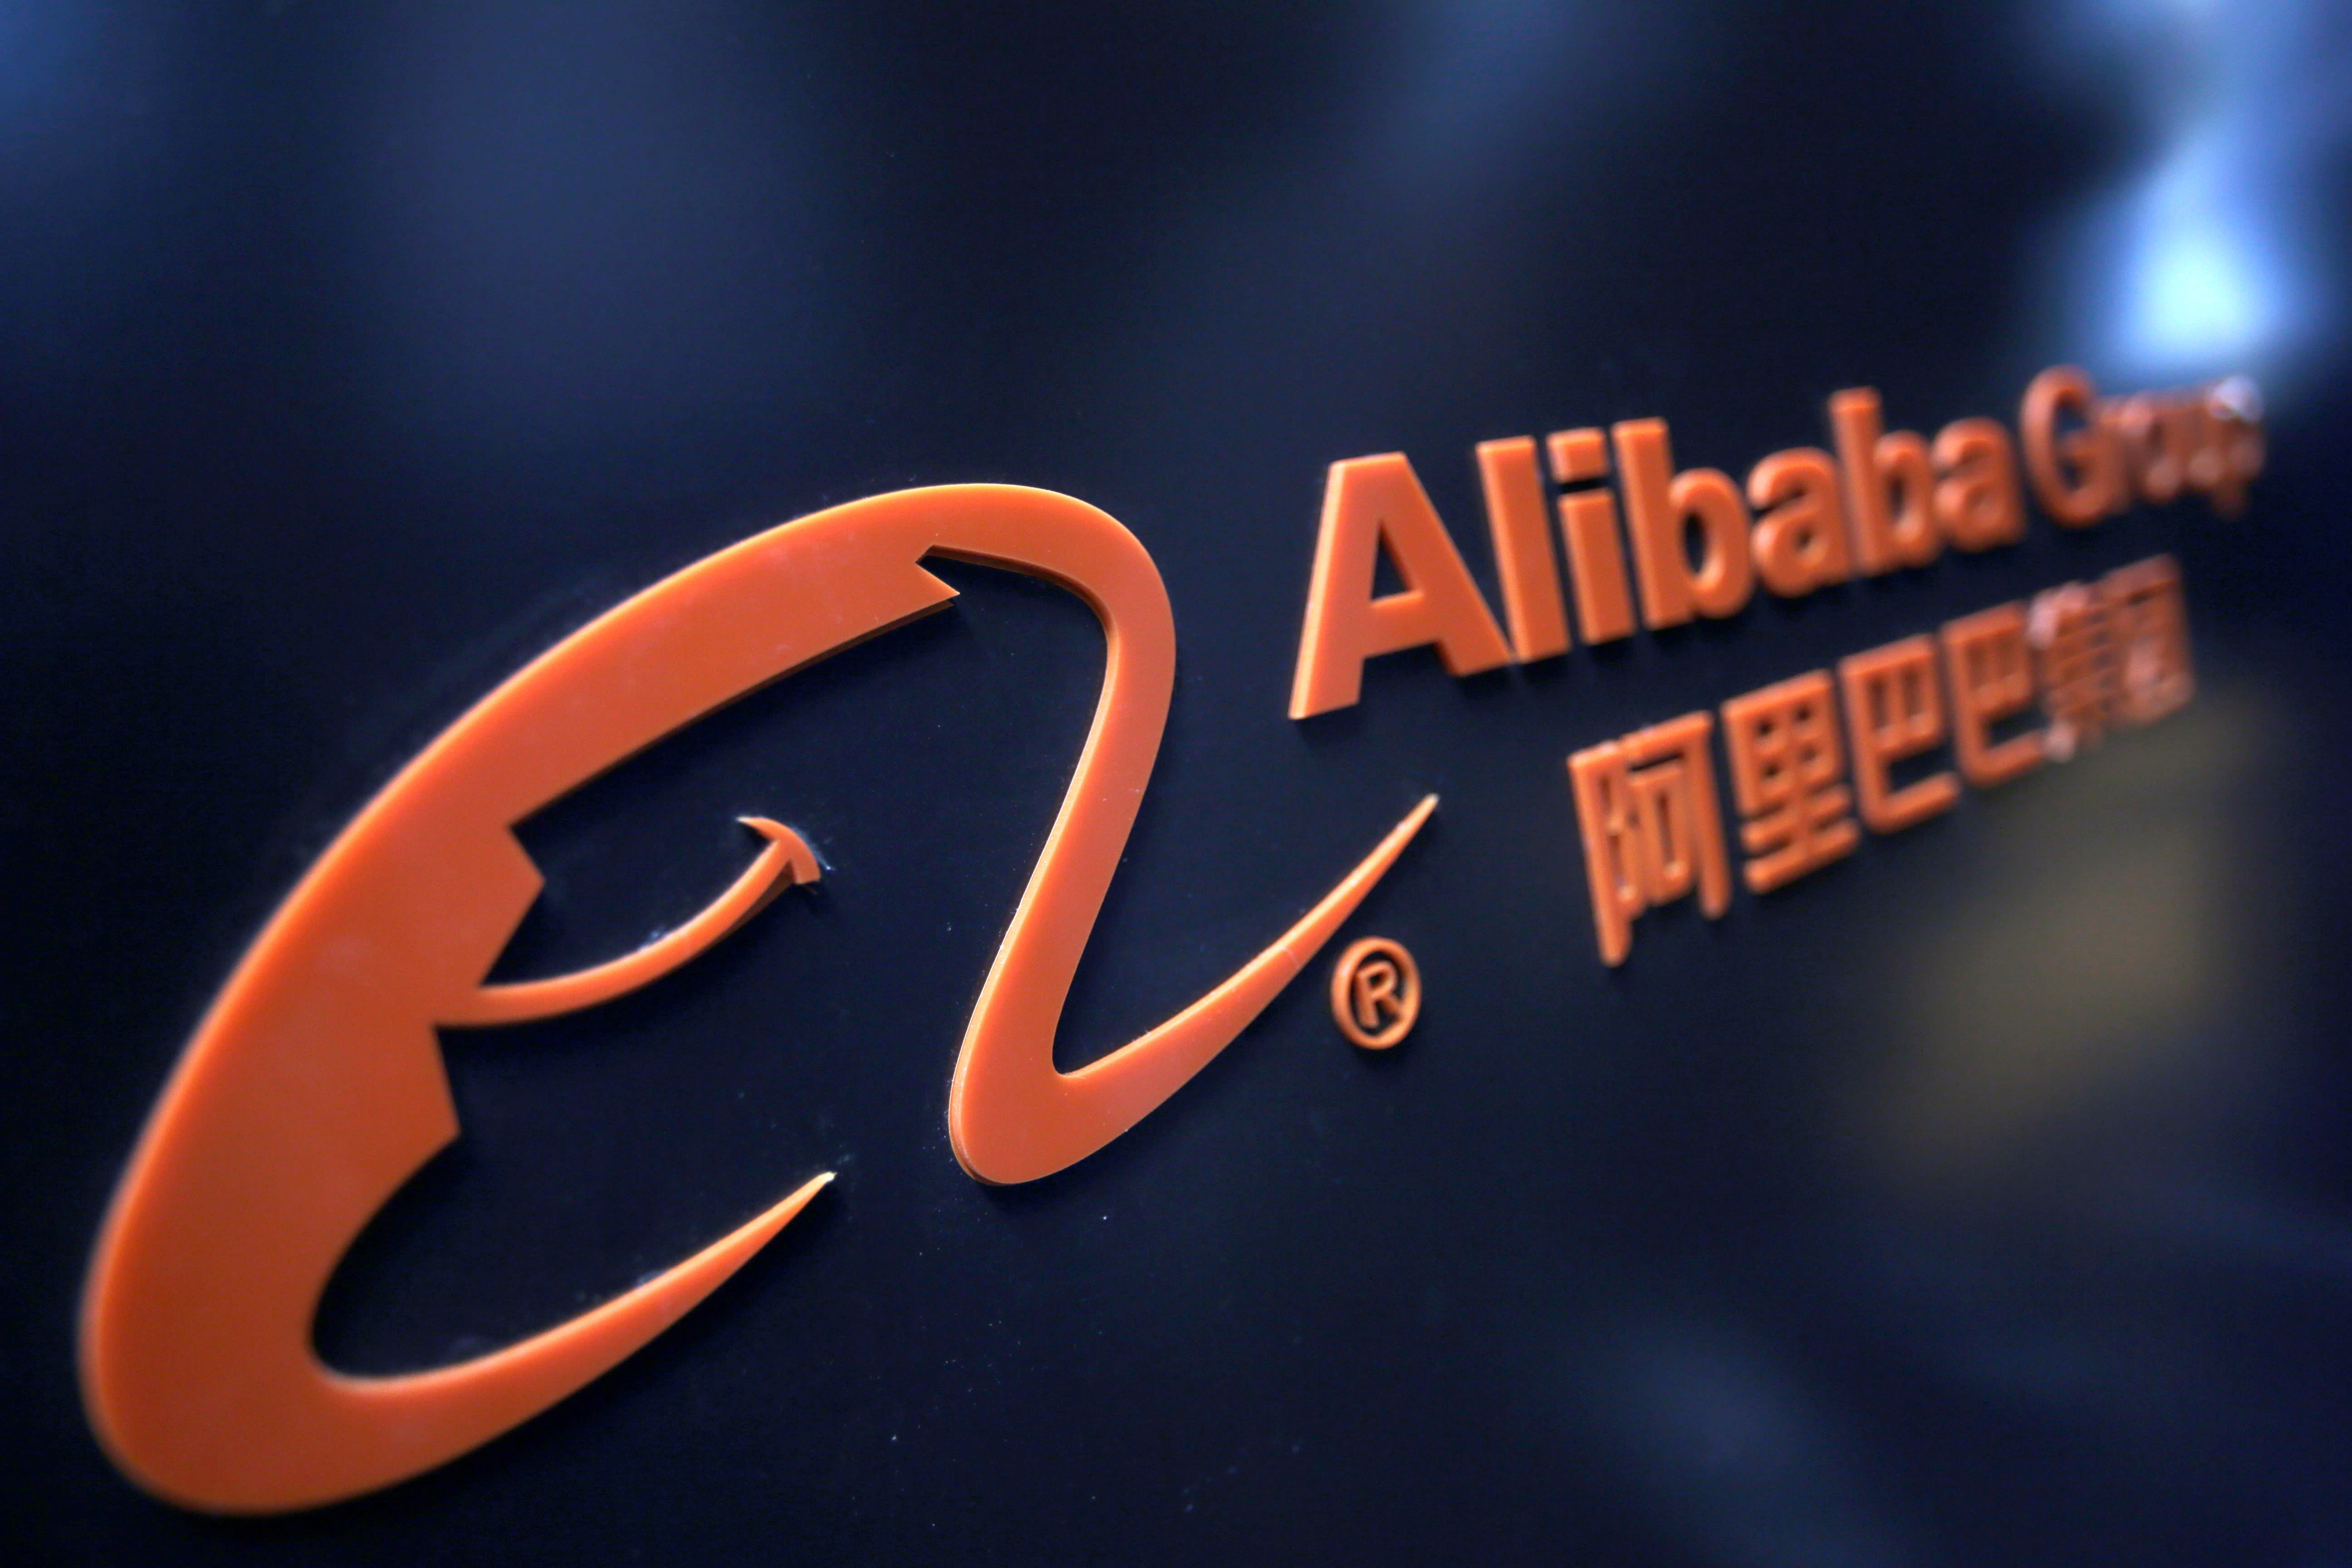 Alibaba says it has developed AI to help detect heart disease